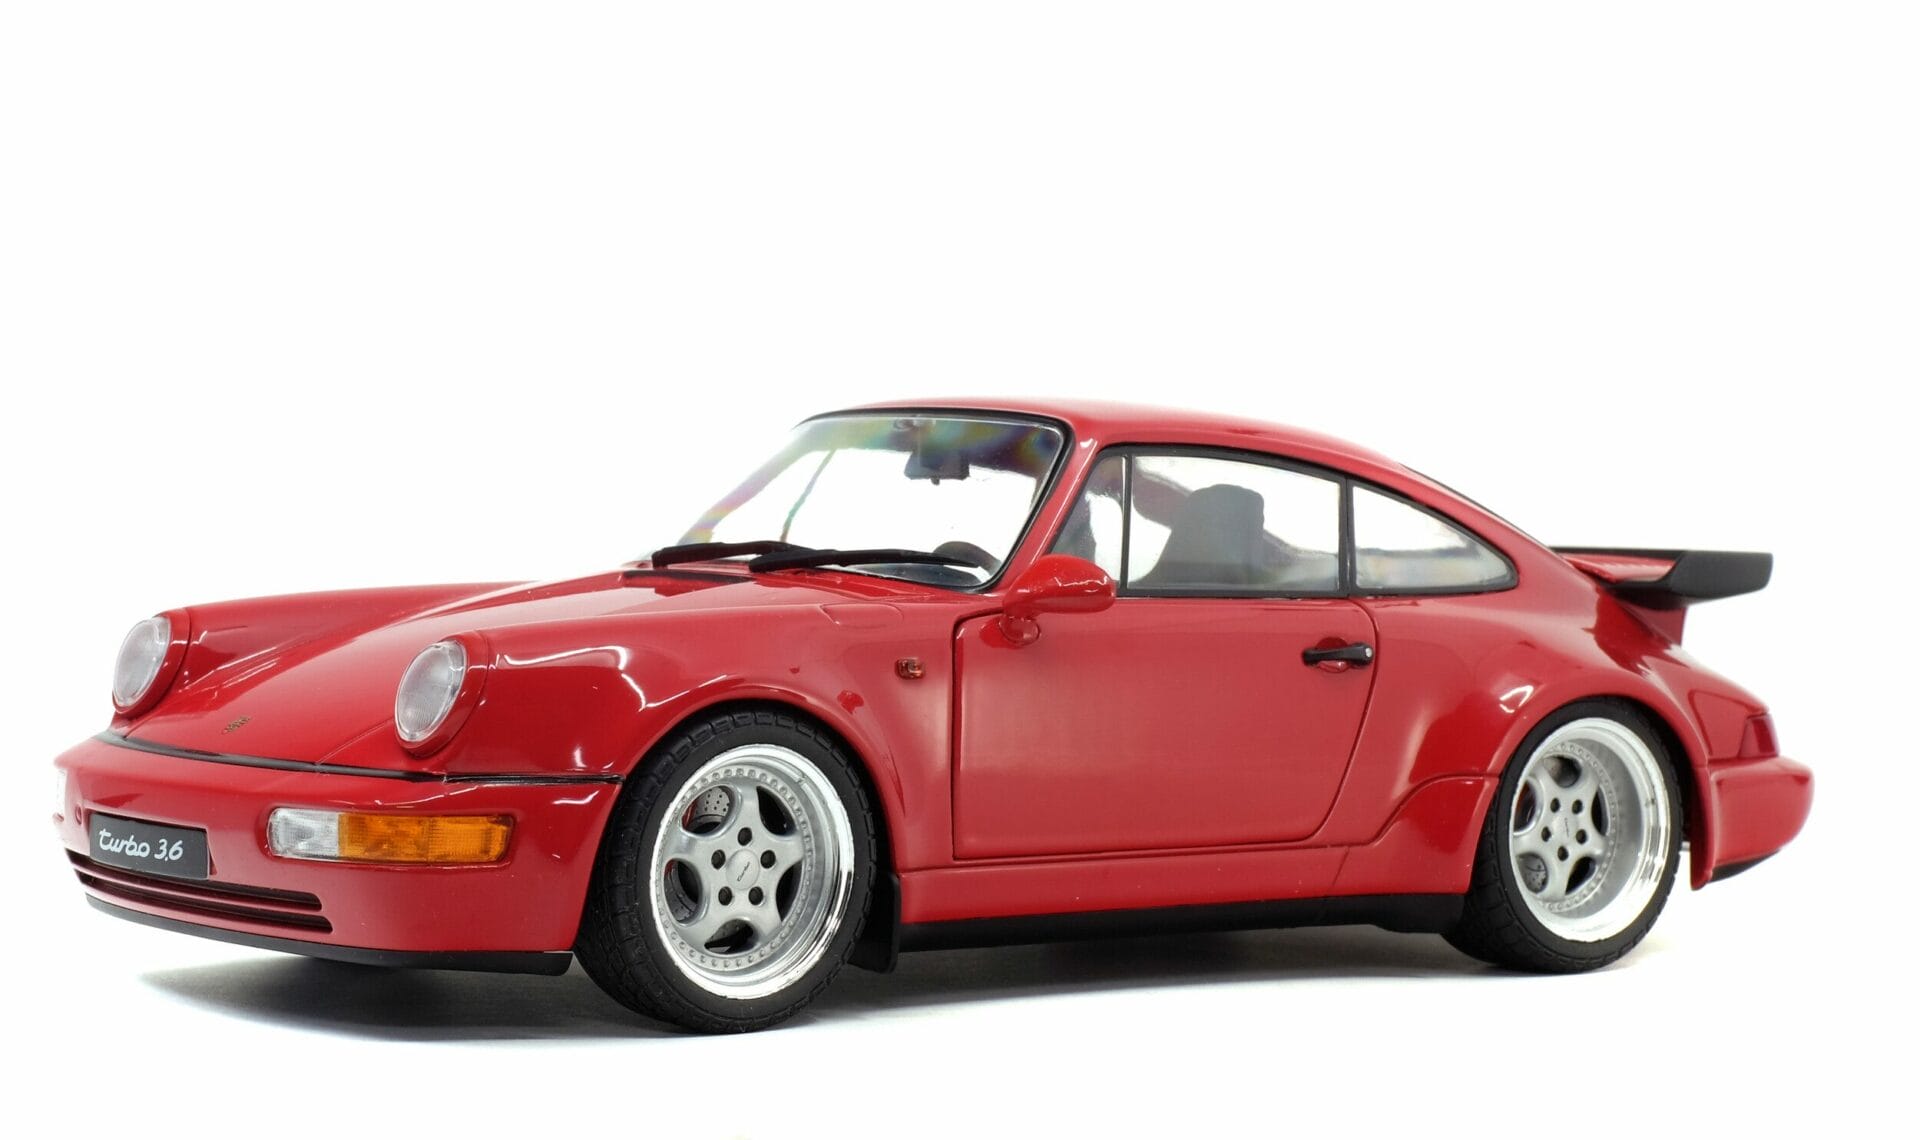 Solido 1:18 Porsche 911 964 Turbo 3.6 Coupe Red Indian 1990 S1803402 Model Car